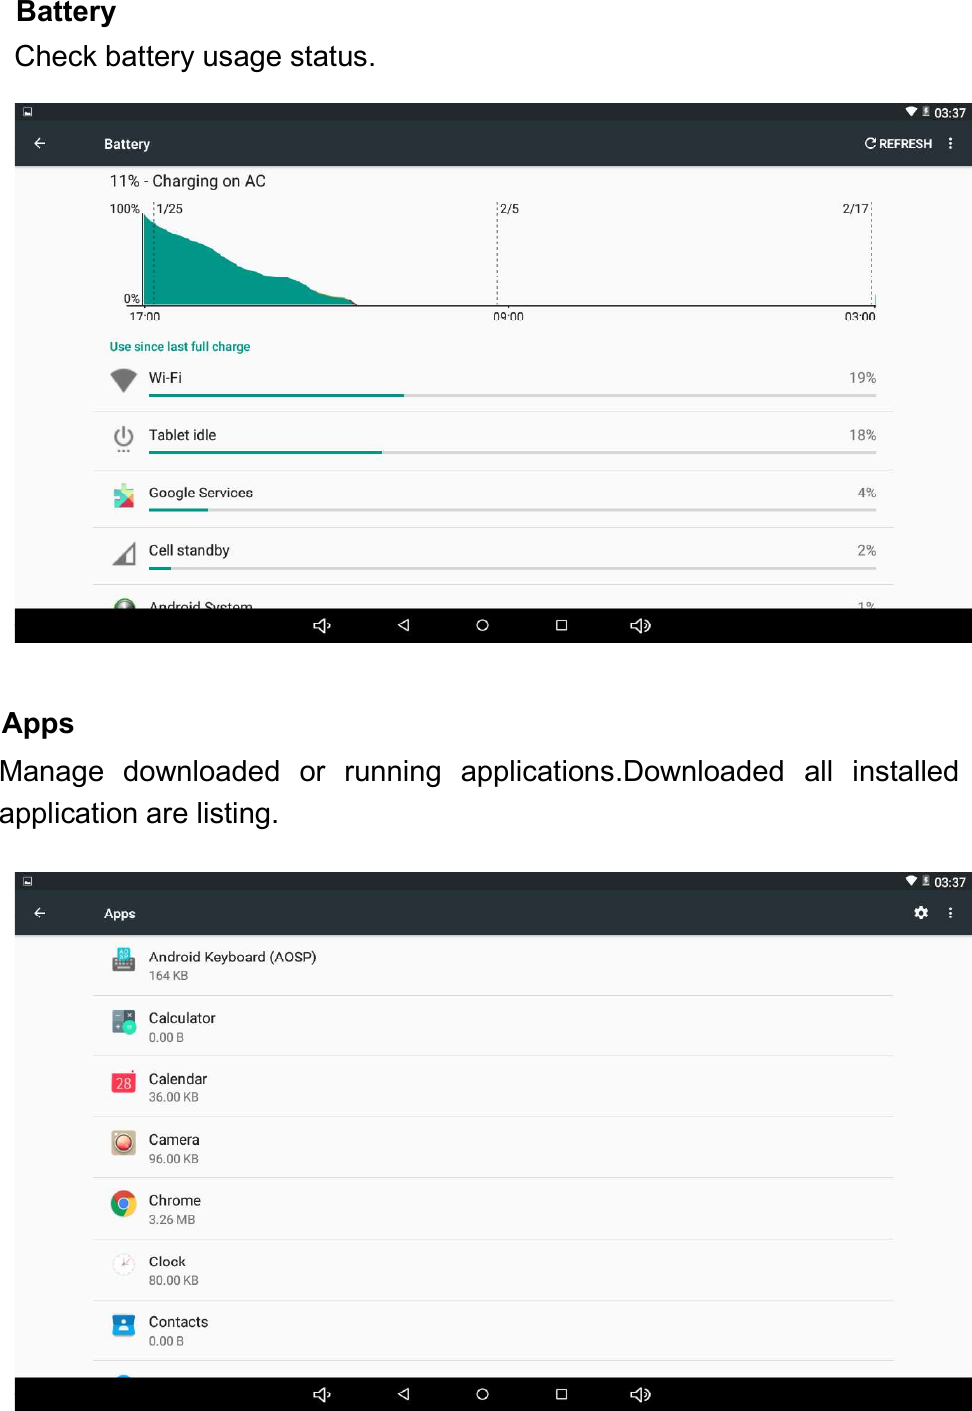 AppsManage downloaded or running applications.Downloaded all installedapplication are listing.BatteryCheck battery usage status.